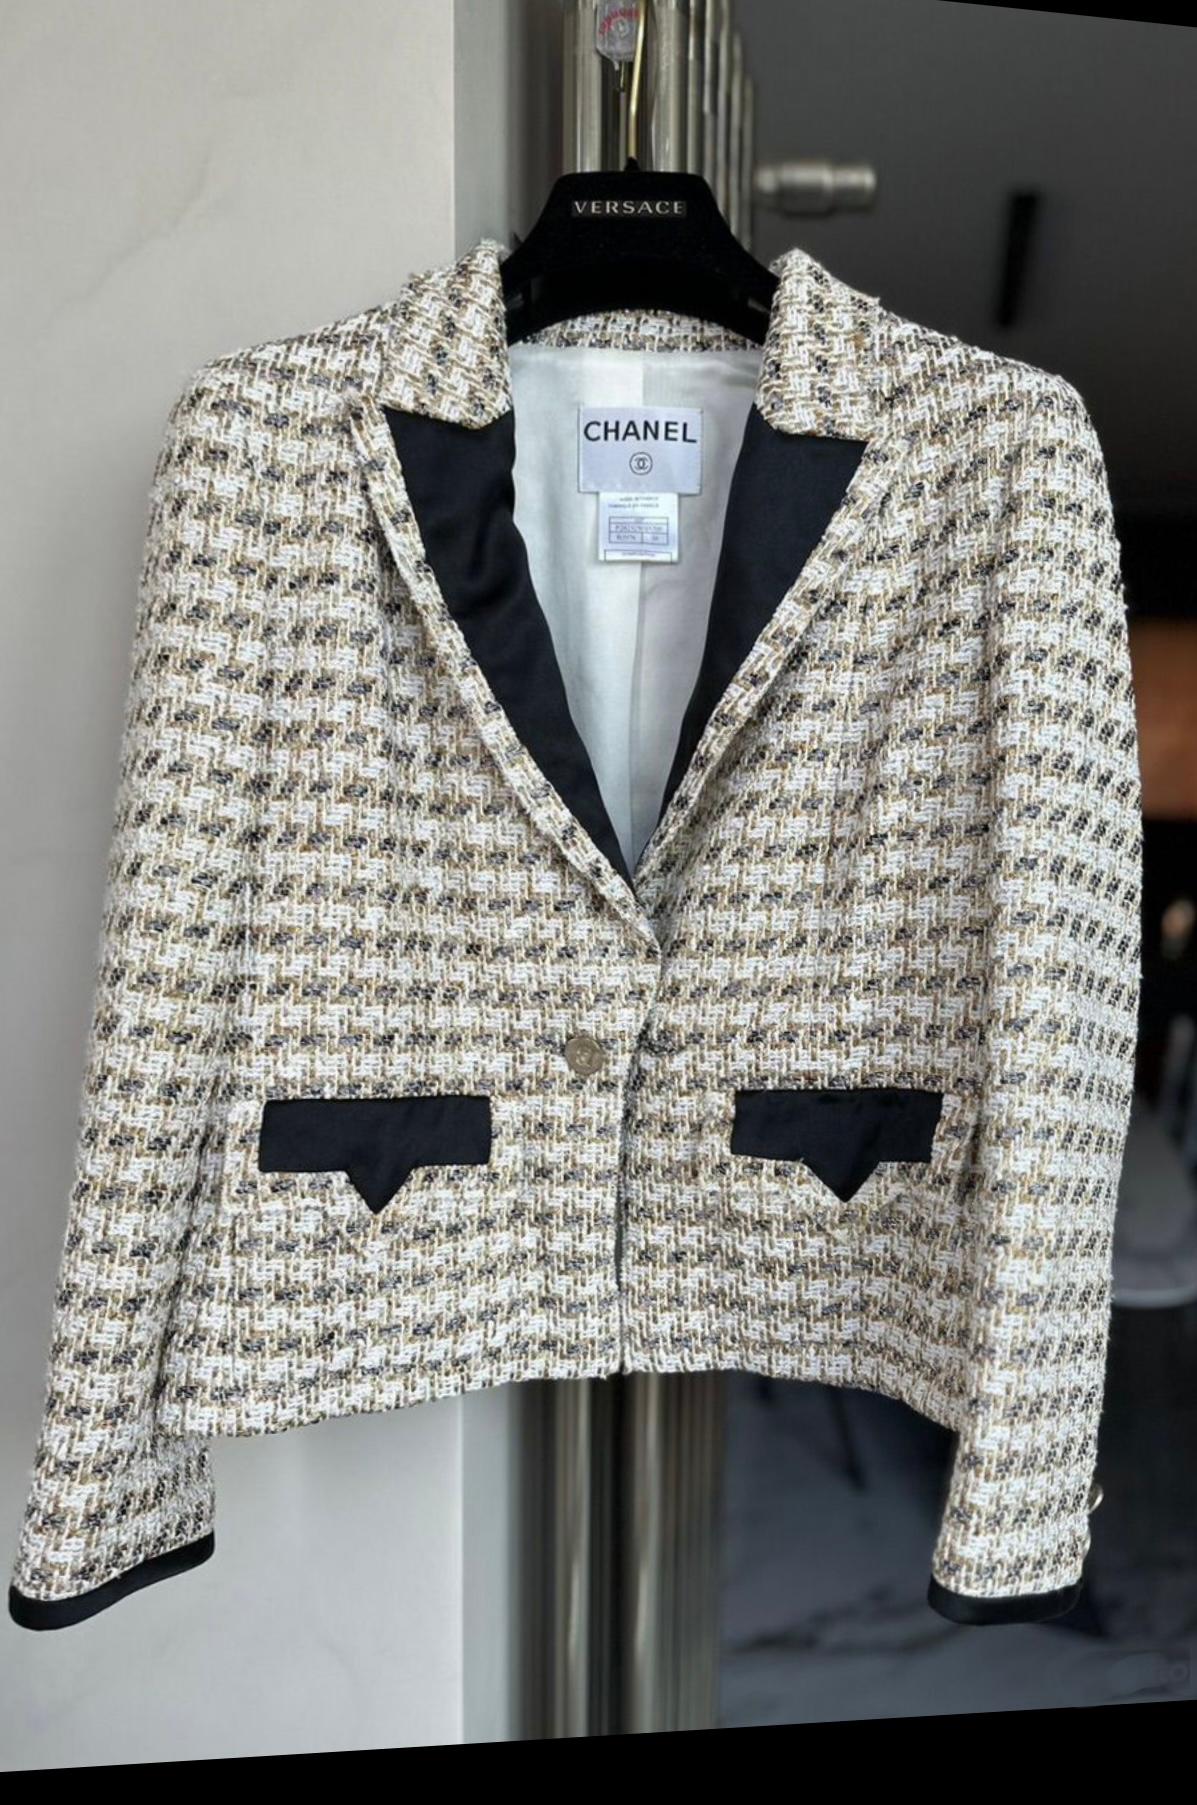 Collectible Chanel ecru and metallic shimmering tweed jacket.
- CC logo gold-tone buttons
- tonal silk lining
Size mark 38 FR. Pristine condition.